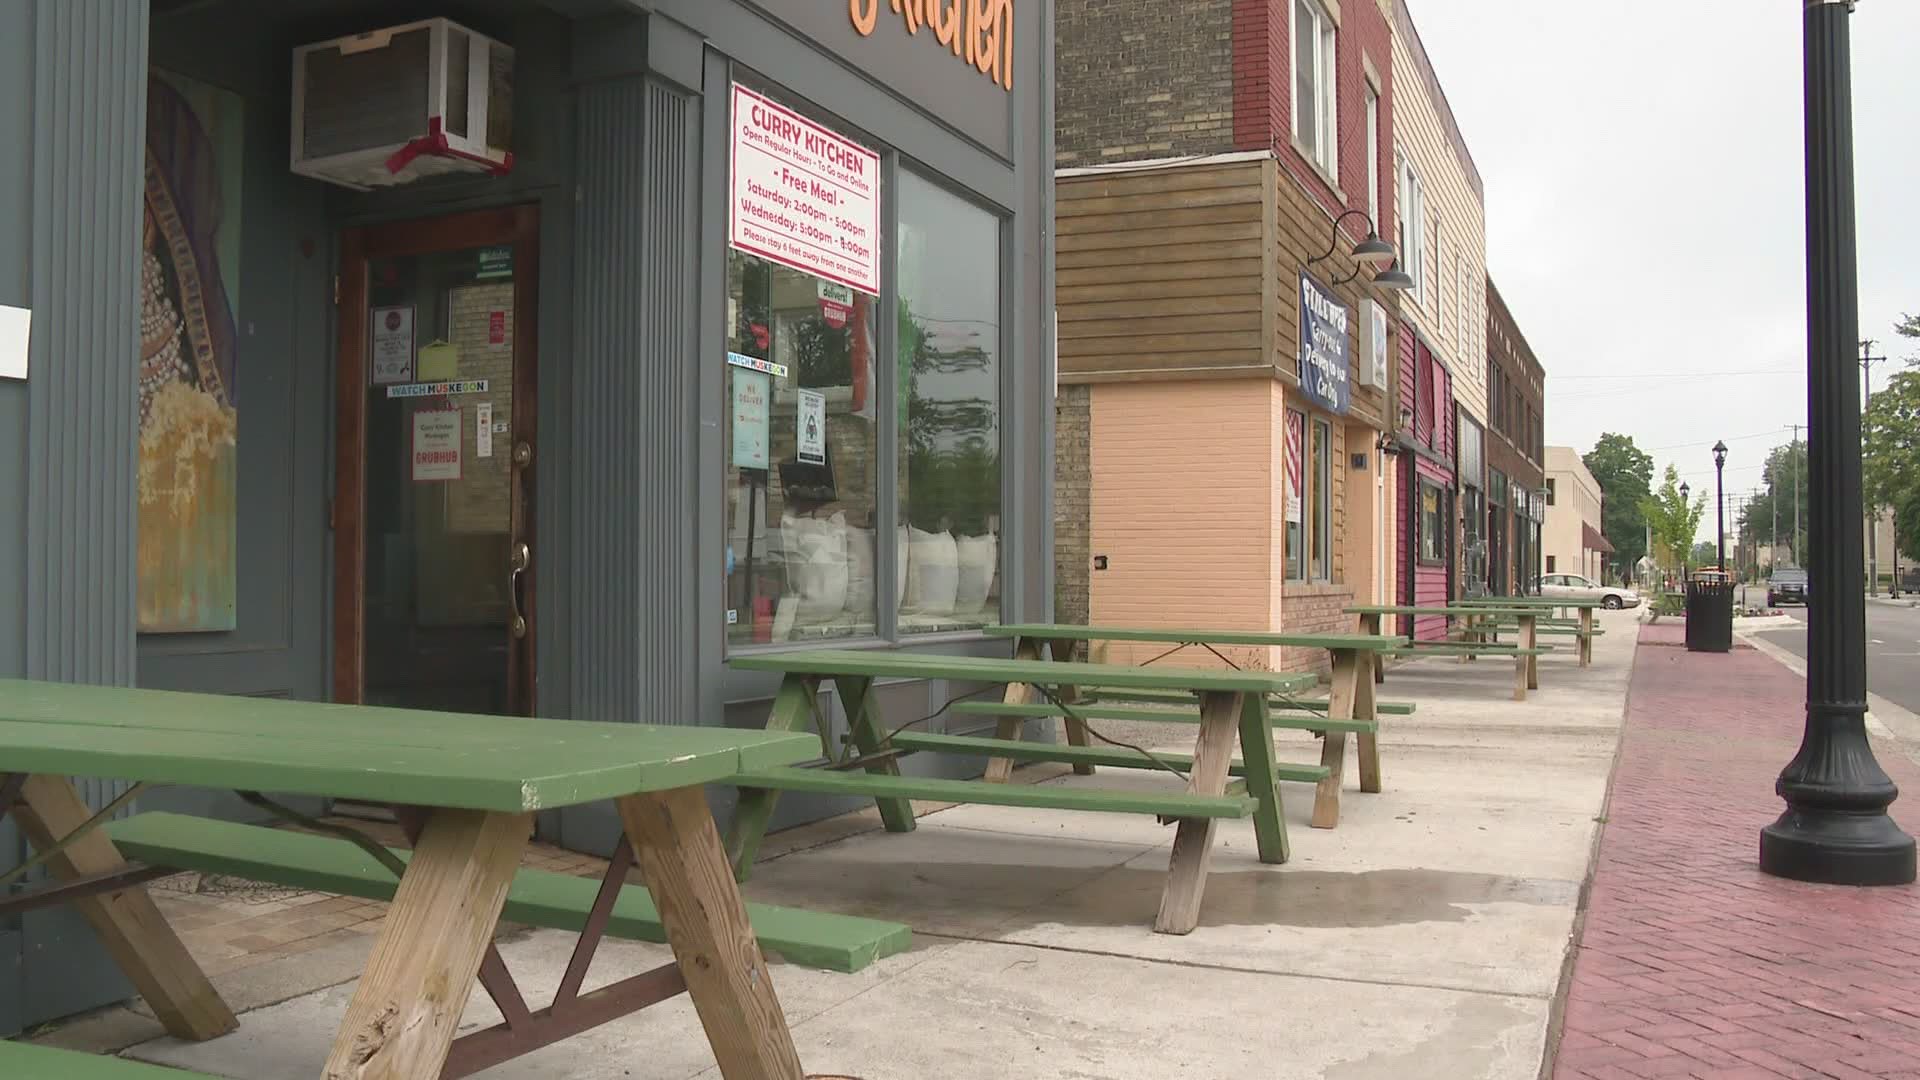 In the city of Muskegon, a much smaller COVID-relief effort for small business is also under scrutiny by some residents.